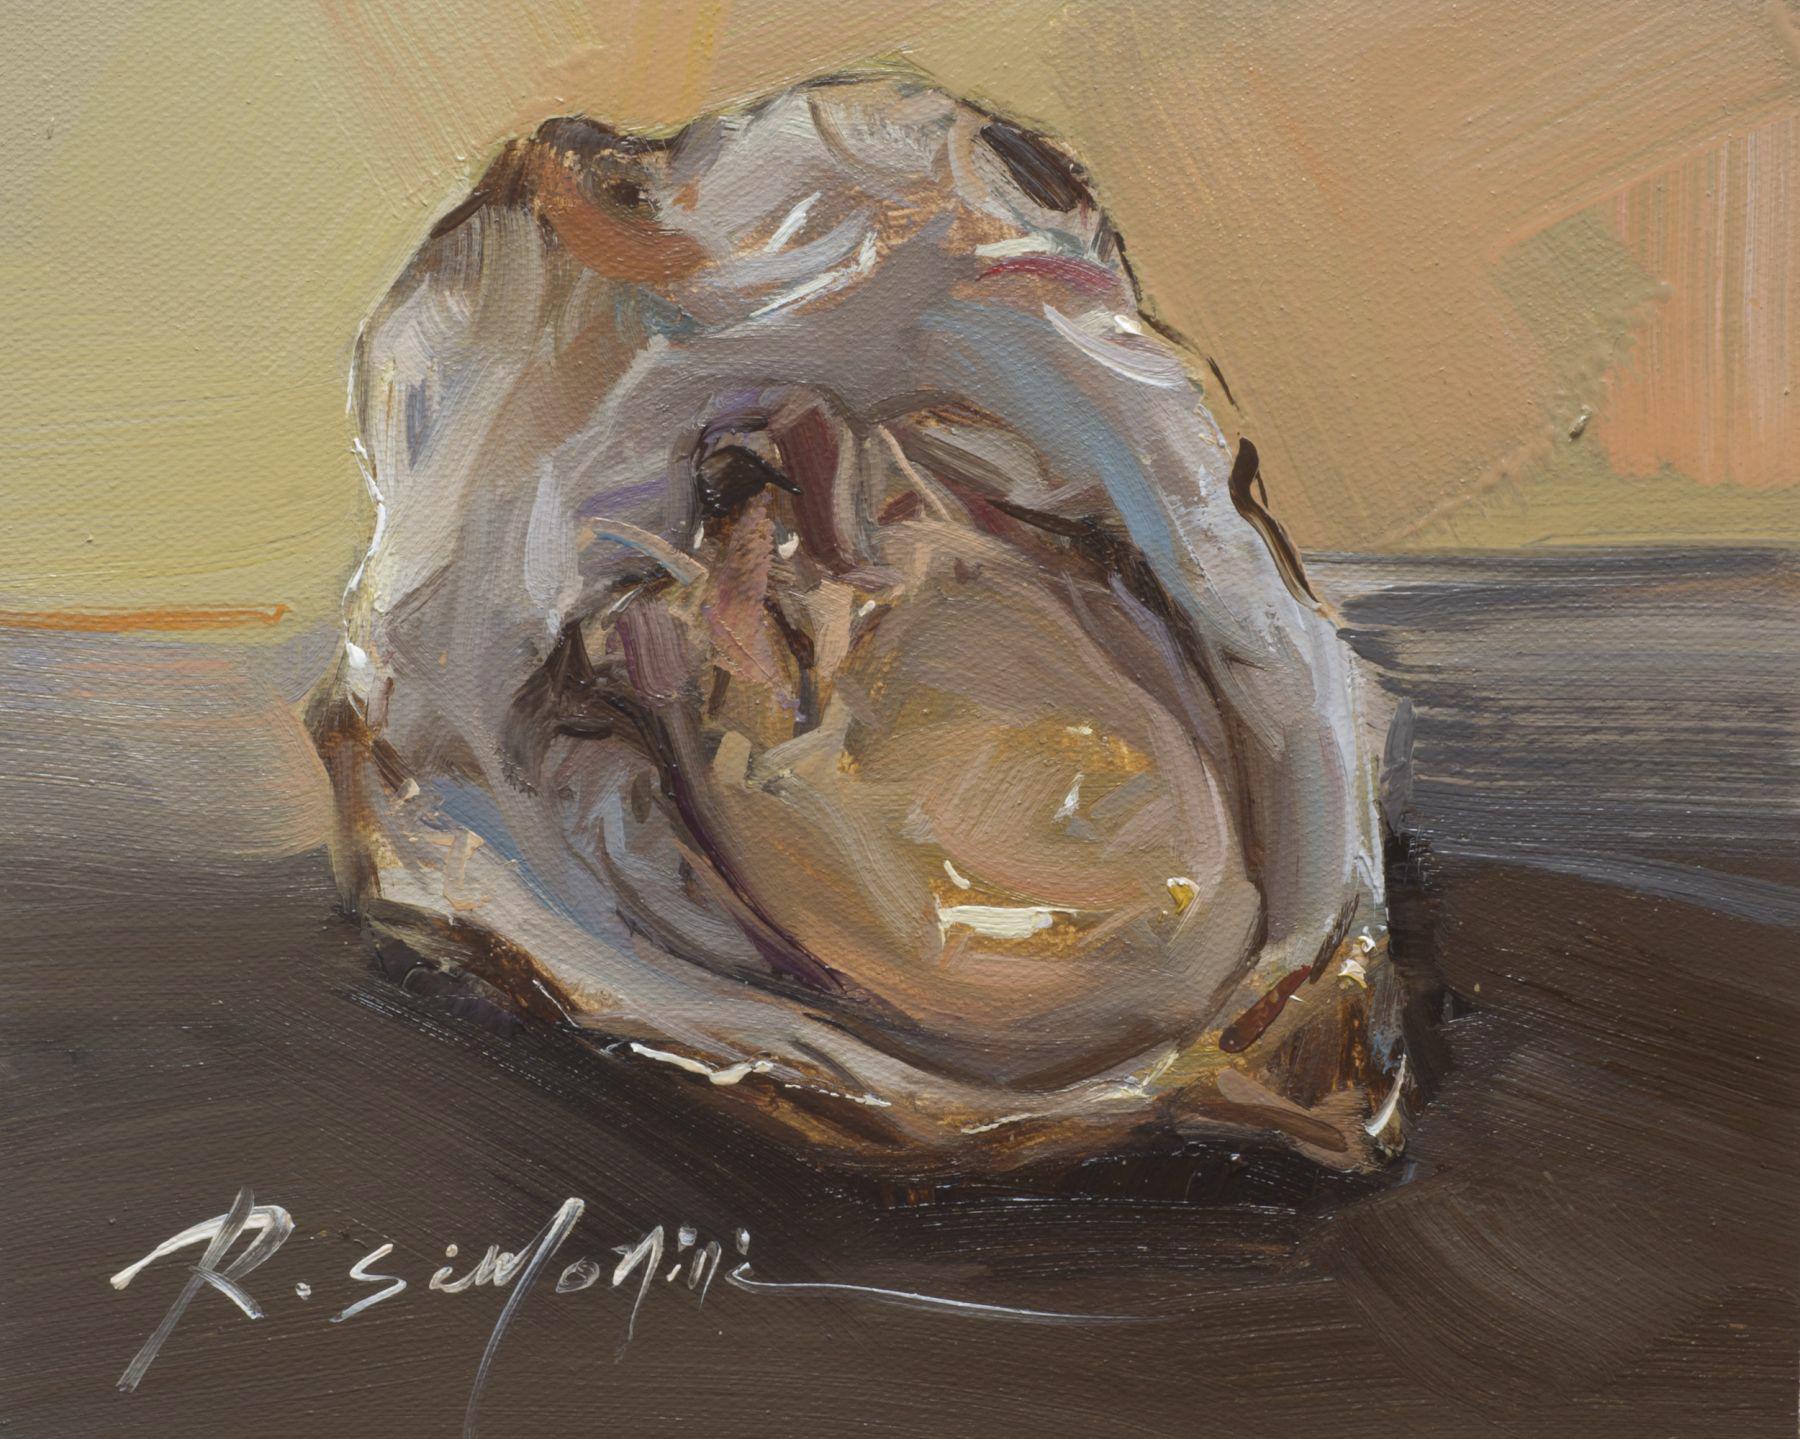 Ray Simonini "Raw" 8x10 Oyster Shell Impressionist Oil Painting on Canvas